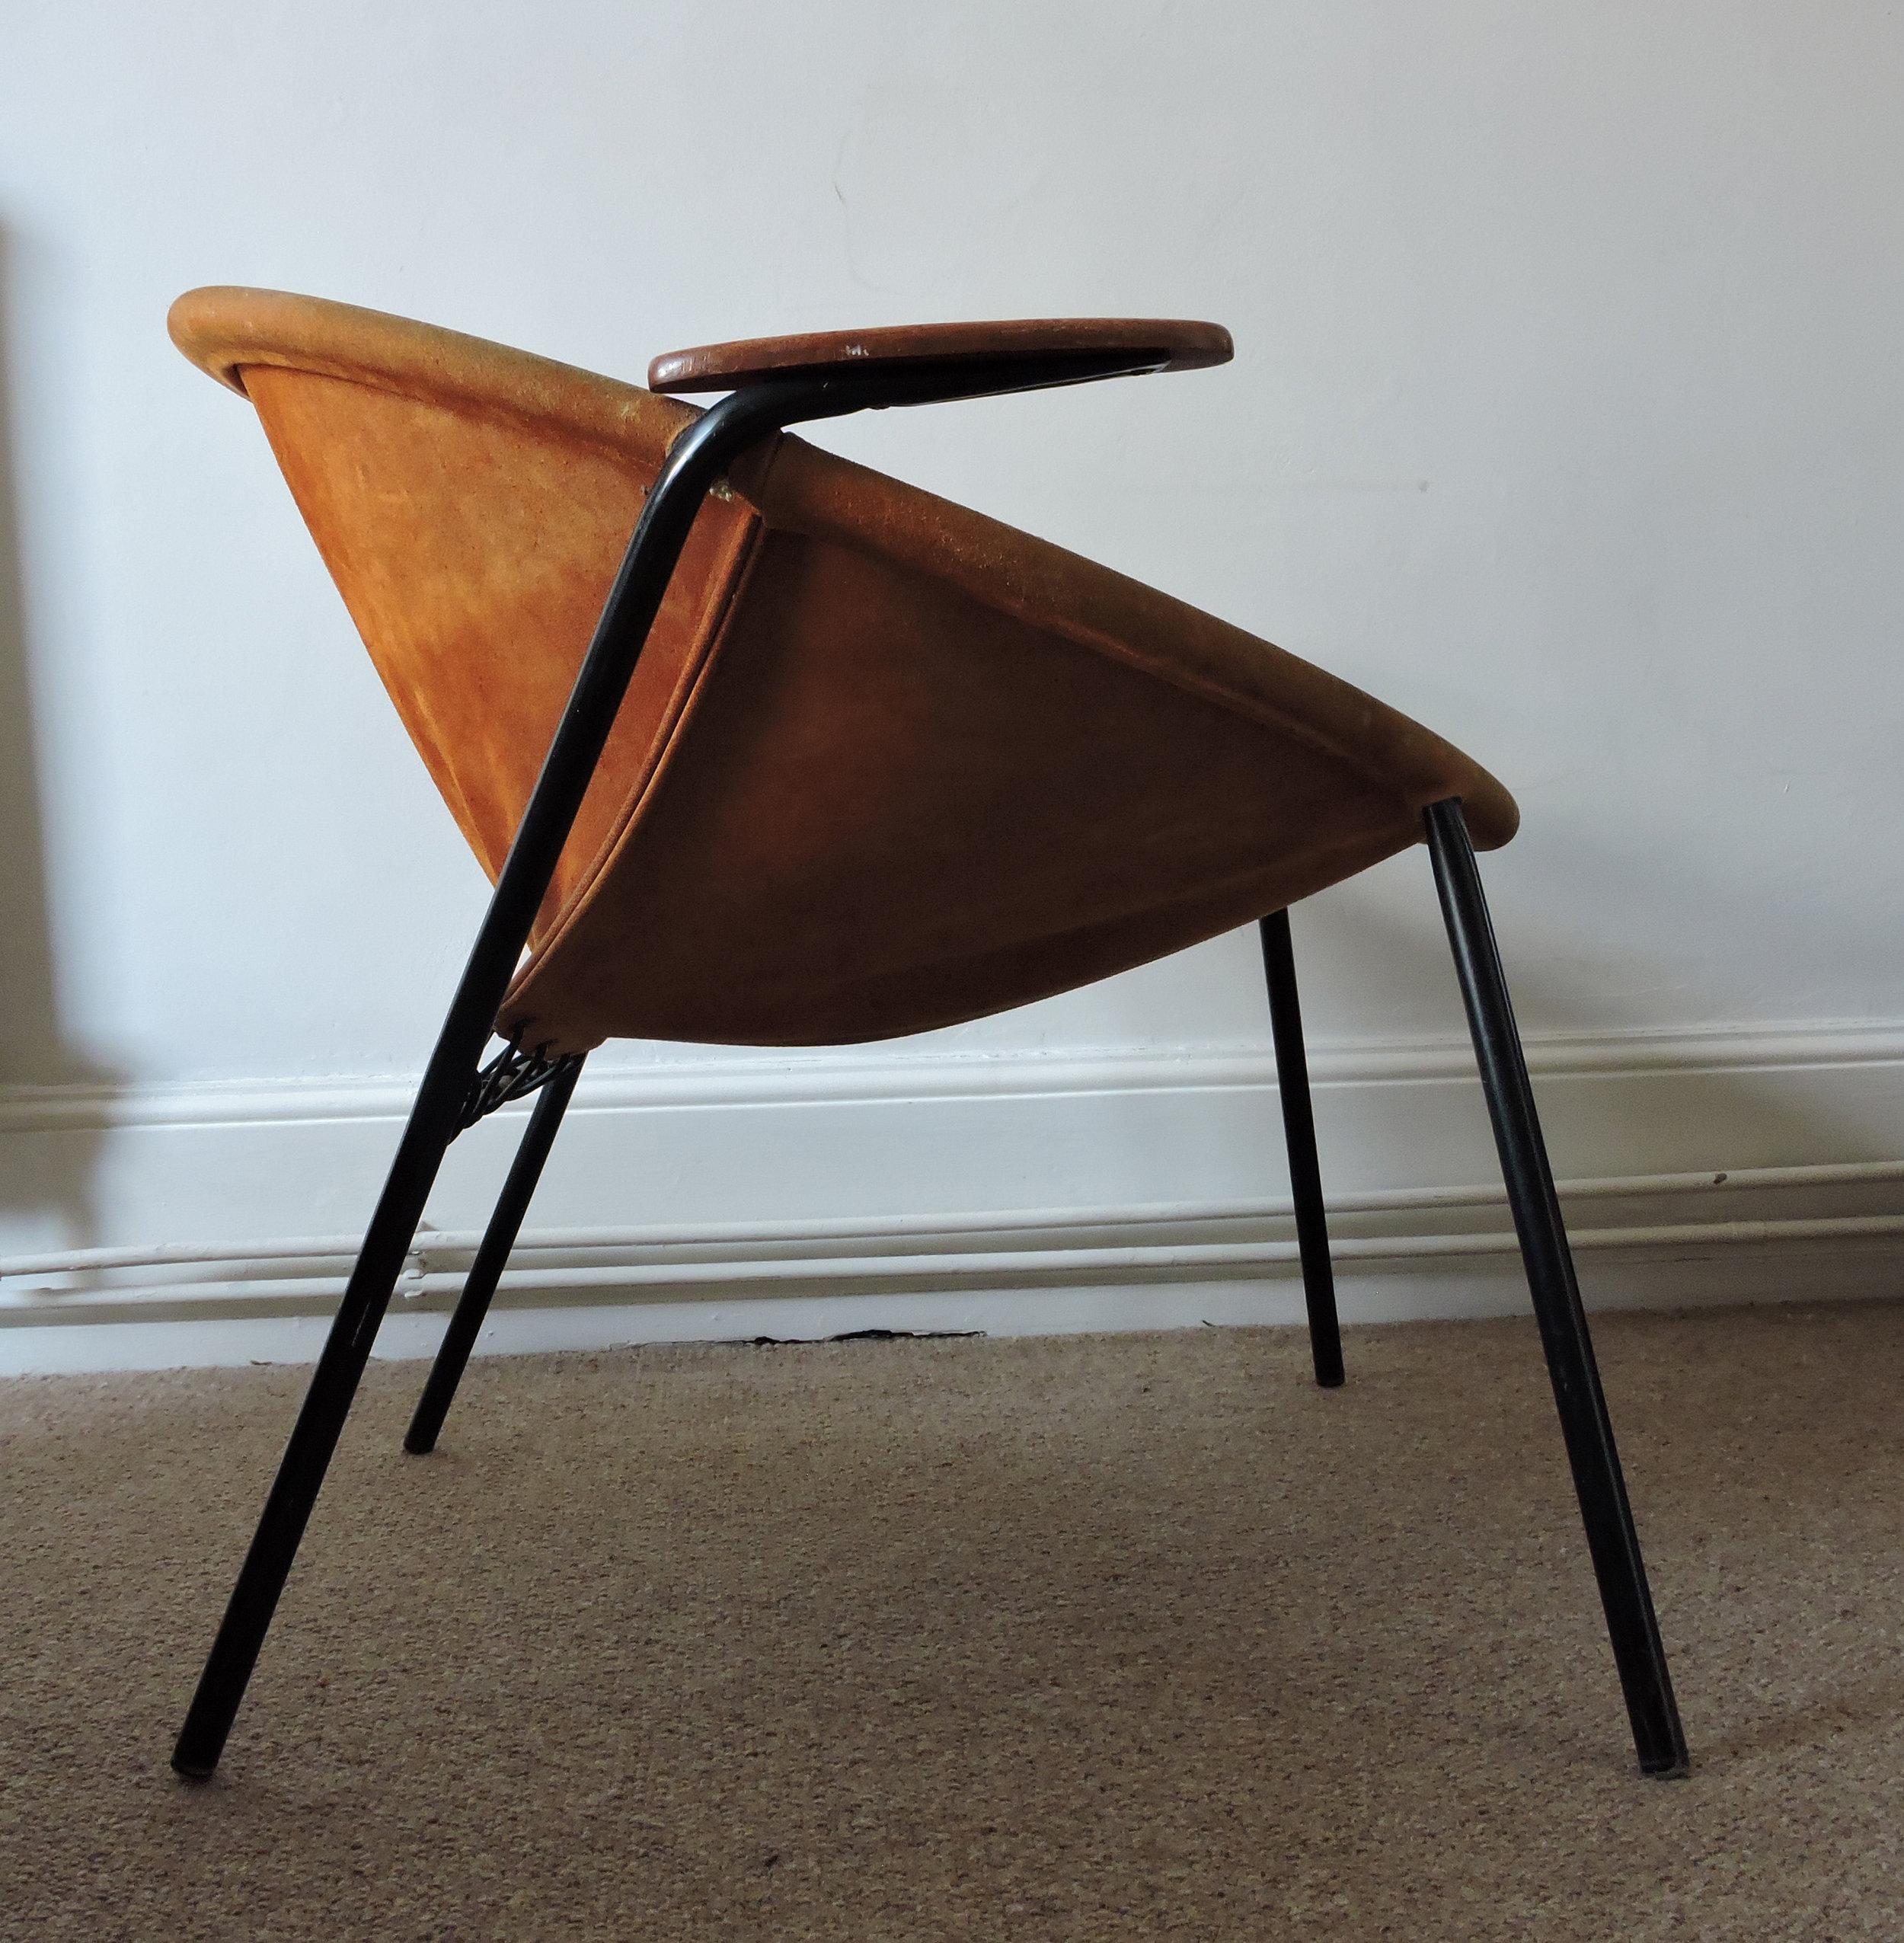 Metal Balloon Chair by Hans Olsen for Lea Design, 1960s For Sale